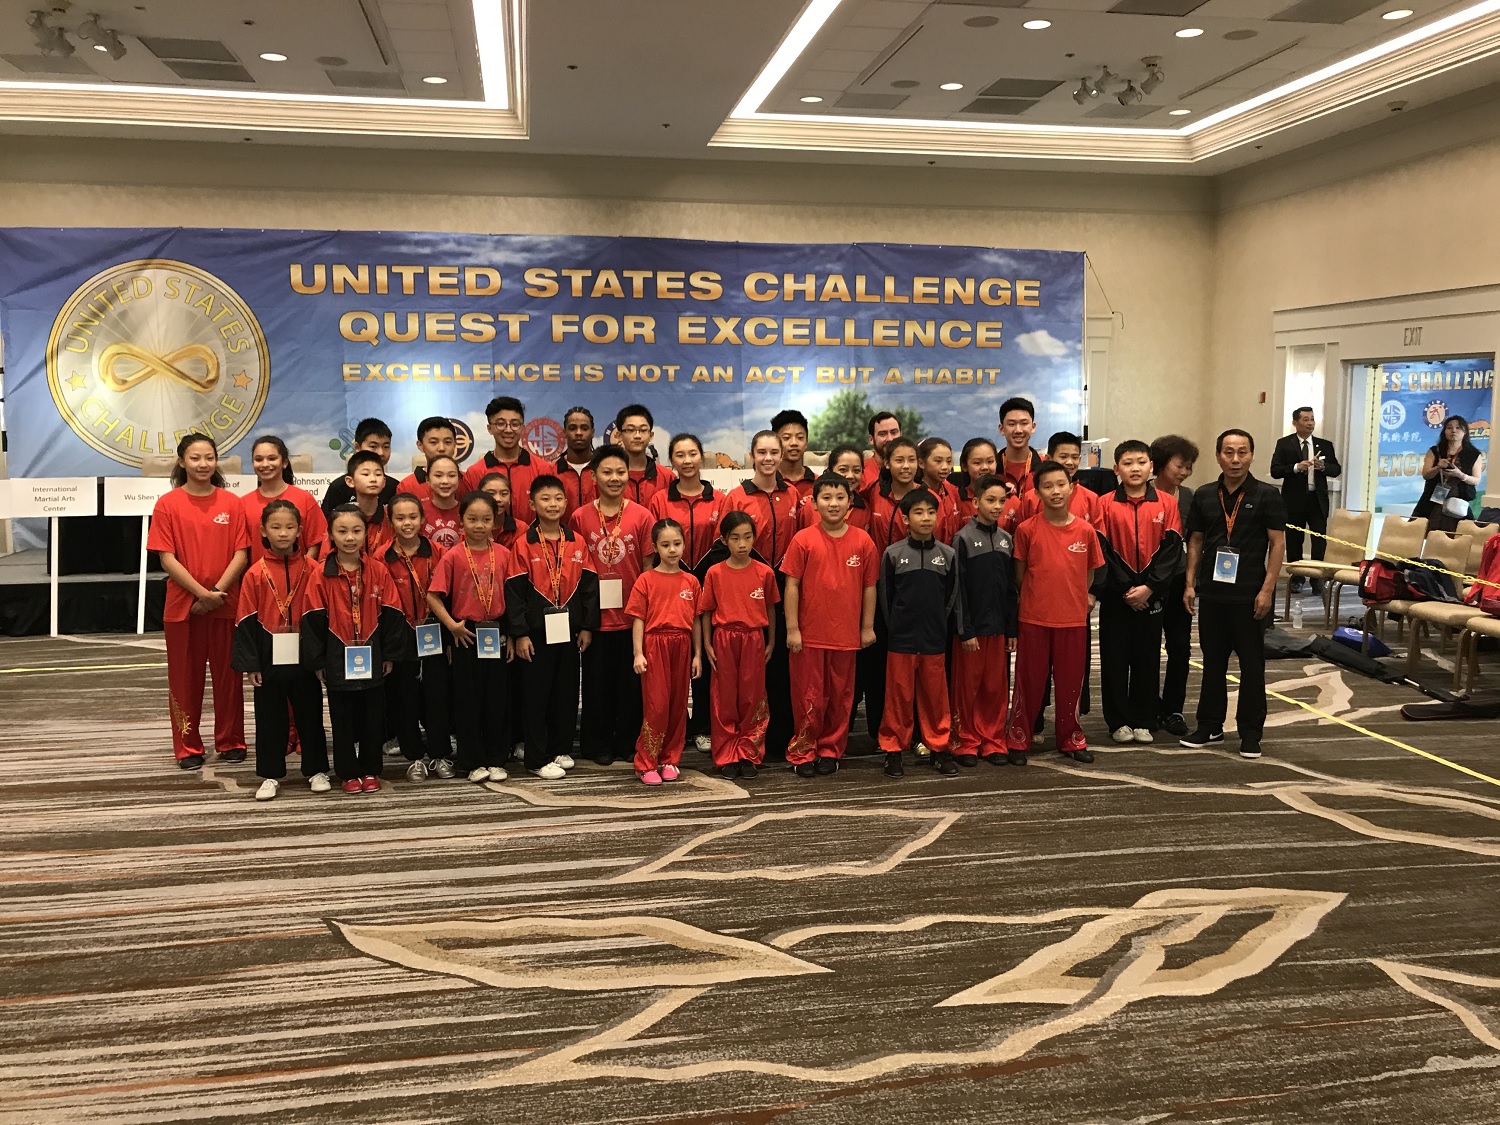 With the US Wushu Academy team